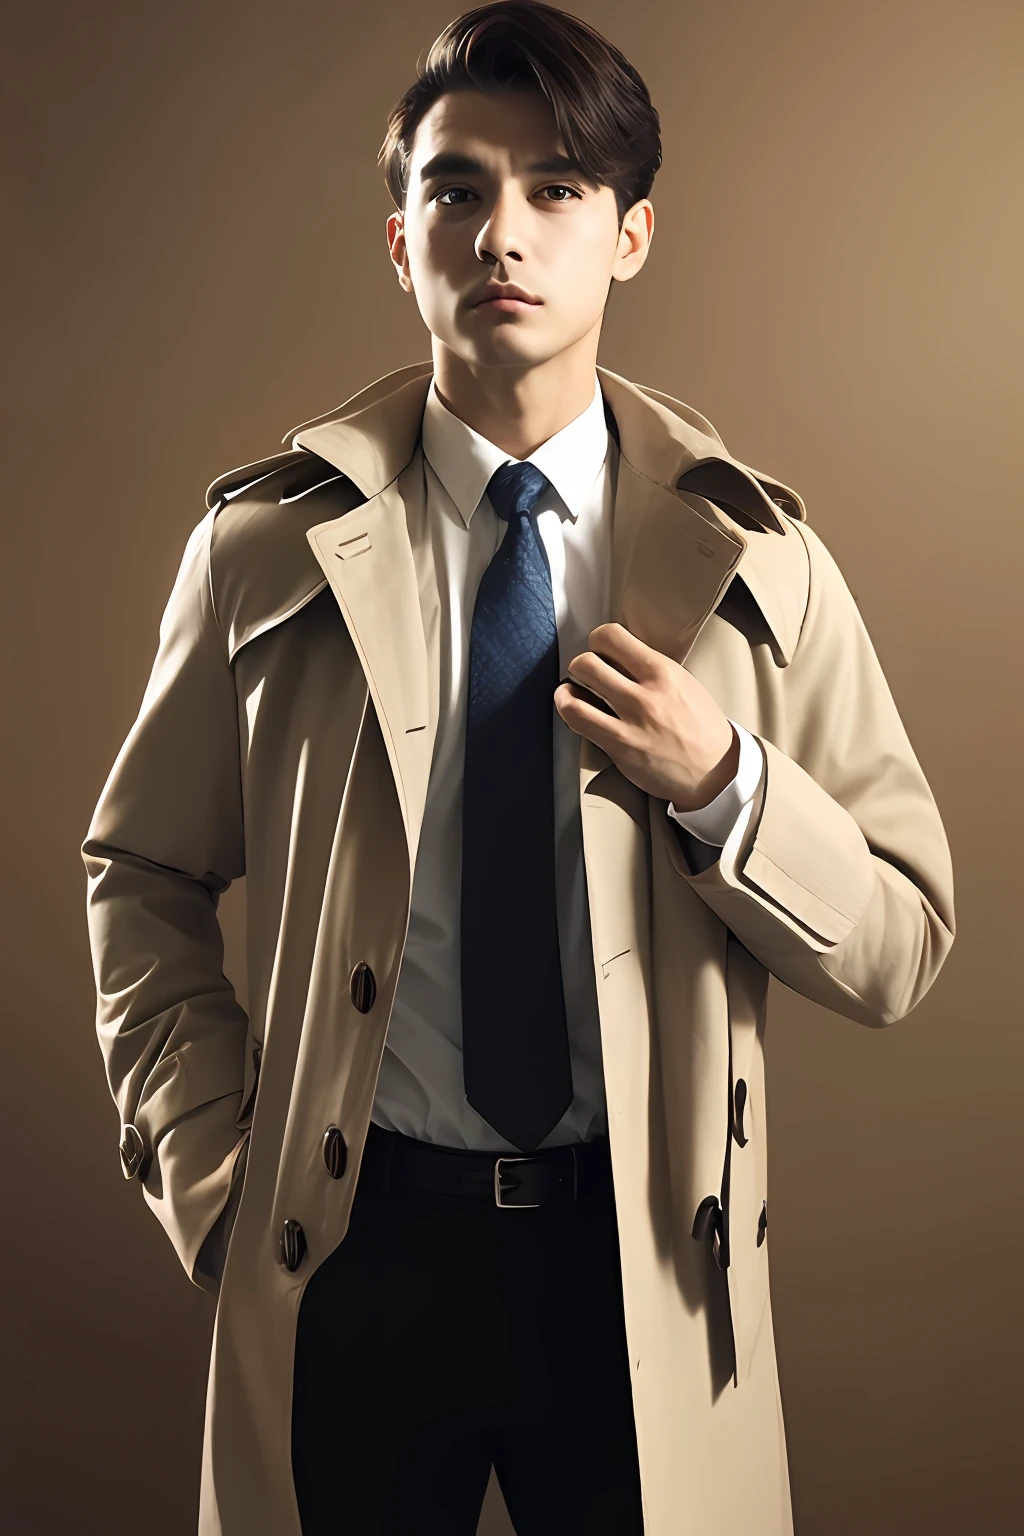 ，blazer jacket，Black coat trench coat， 18k, {{Masterpiece}}, Best quality, High quality:1.4), simplebackground，brown background，，{{[[front look}}, Photo pose)]], very pretty look face, And very nice red eyes, 1人, Solo, Portrait of Habibnul Magomedov in a suit and tie, Beard, Serious, Details, Realistic, Photography, The background is blurred out, soft focus